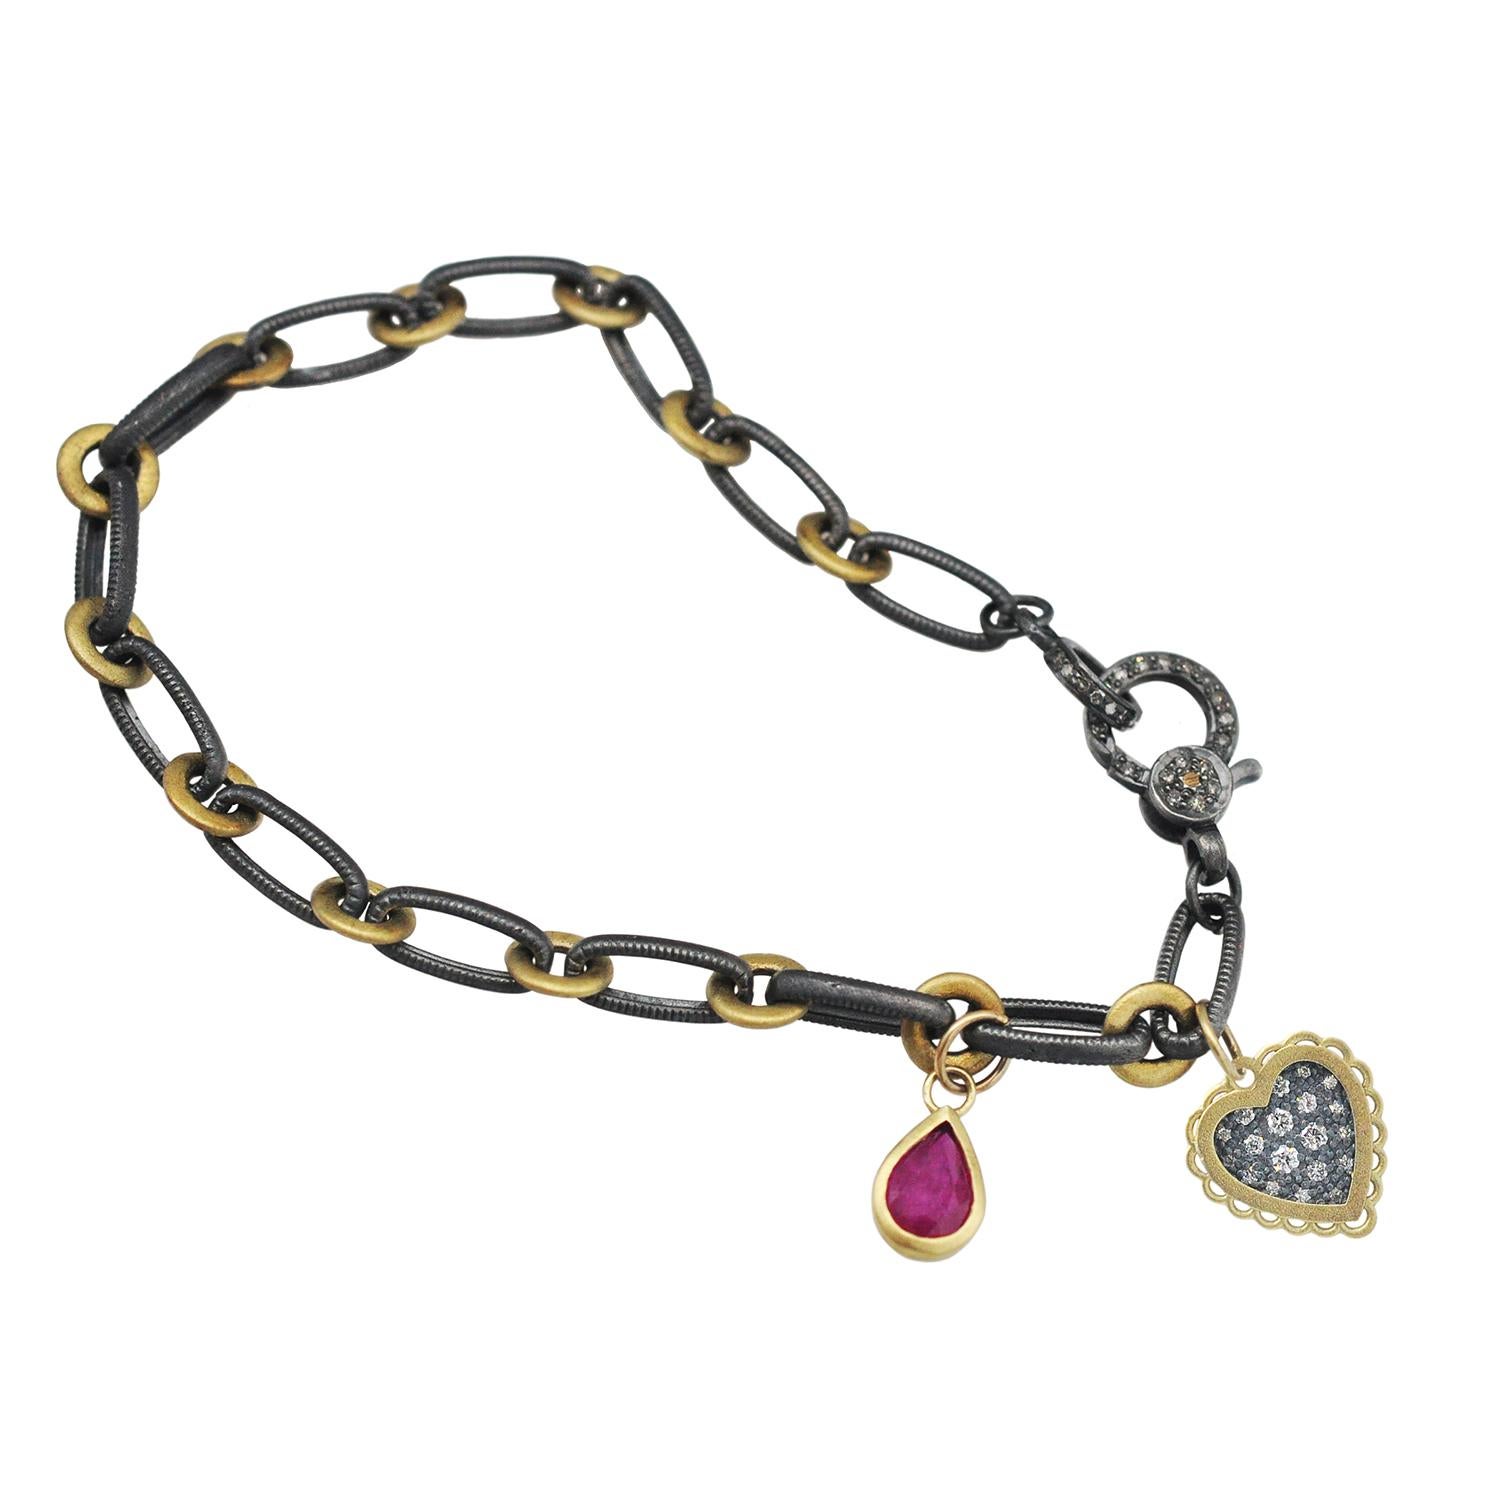 Pave set diamonds, mixed metals, and a juicy pink ruby make this charm bracelet a real show-stopper!
Oxidized sterling silver and 18k yellow gold links are connected with a pave set diamond clasp and adorned with two beautiful charms: a 1/2